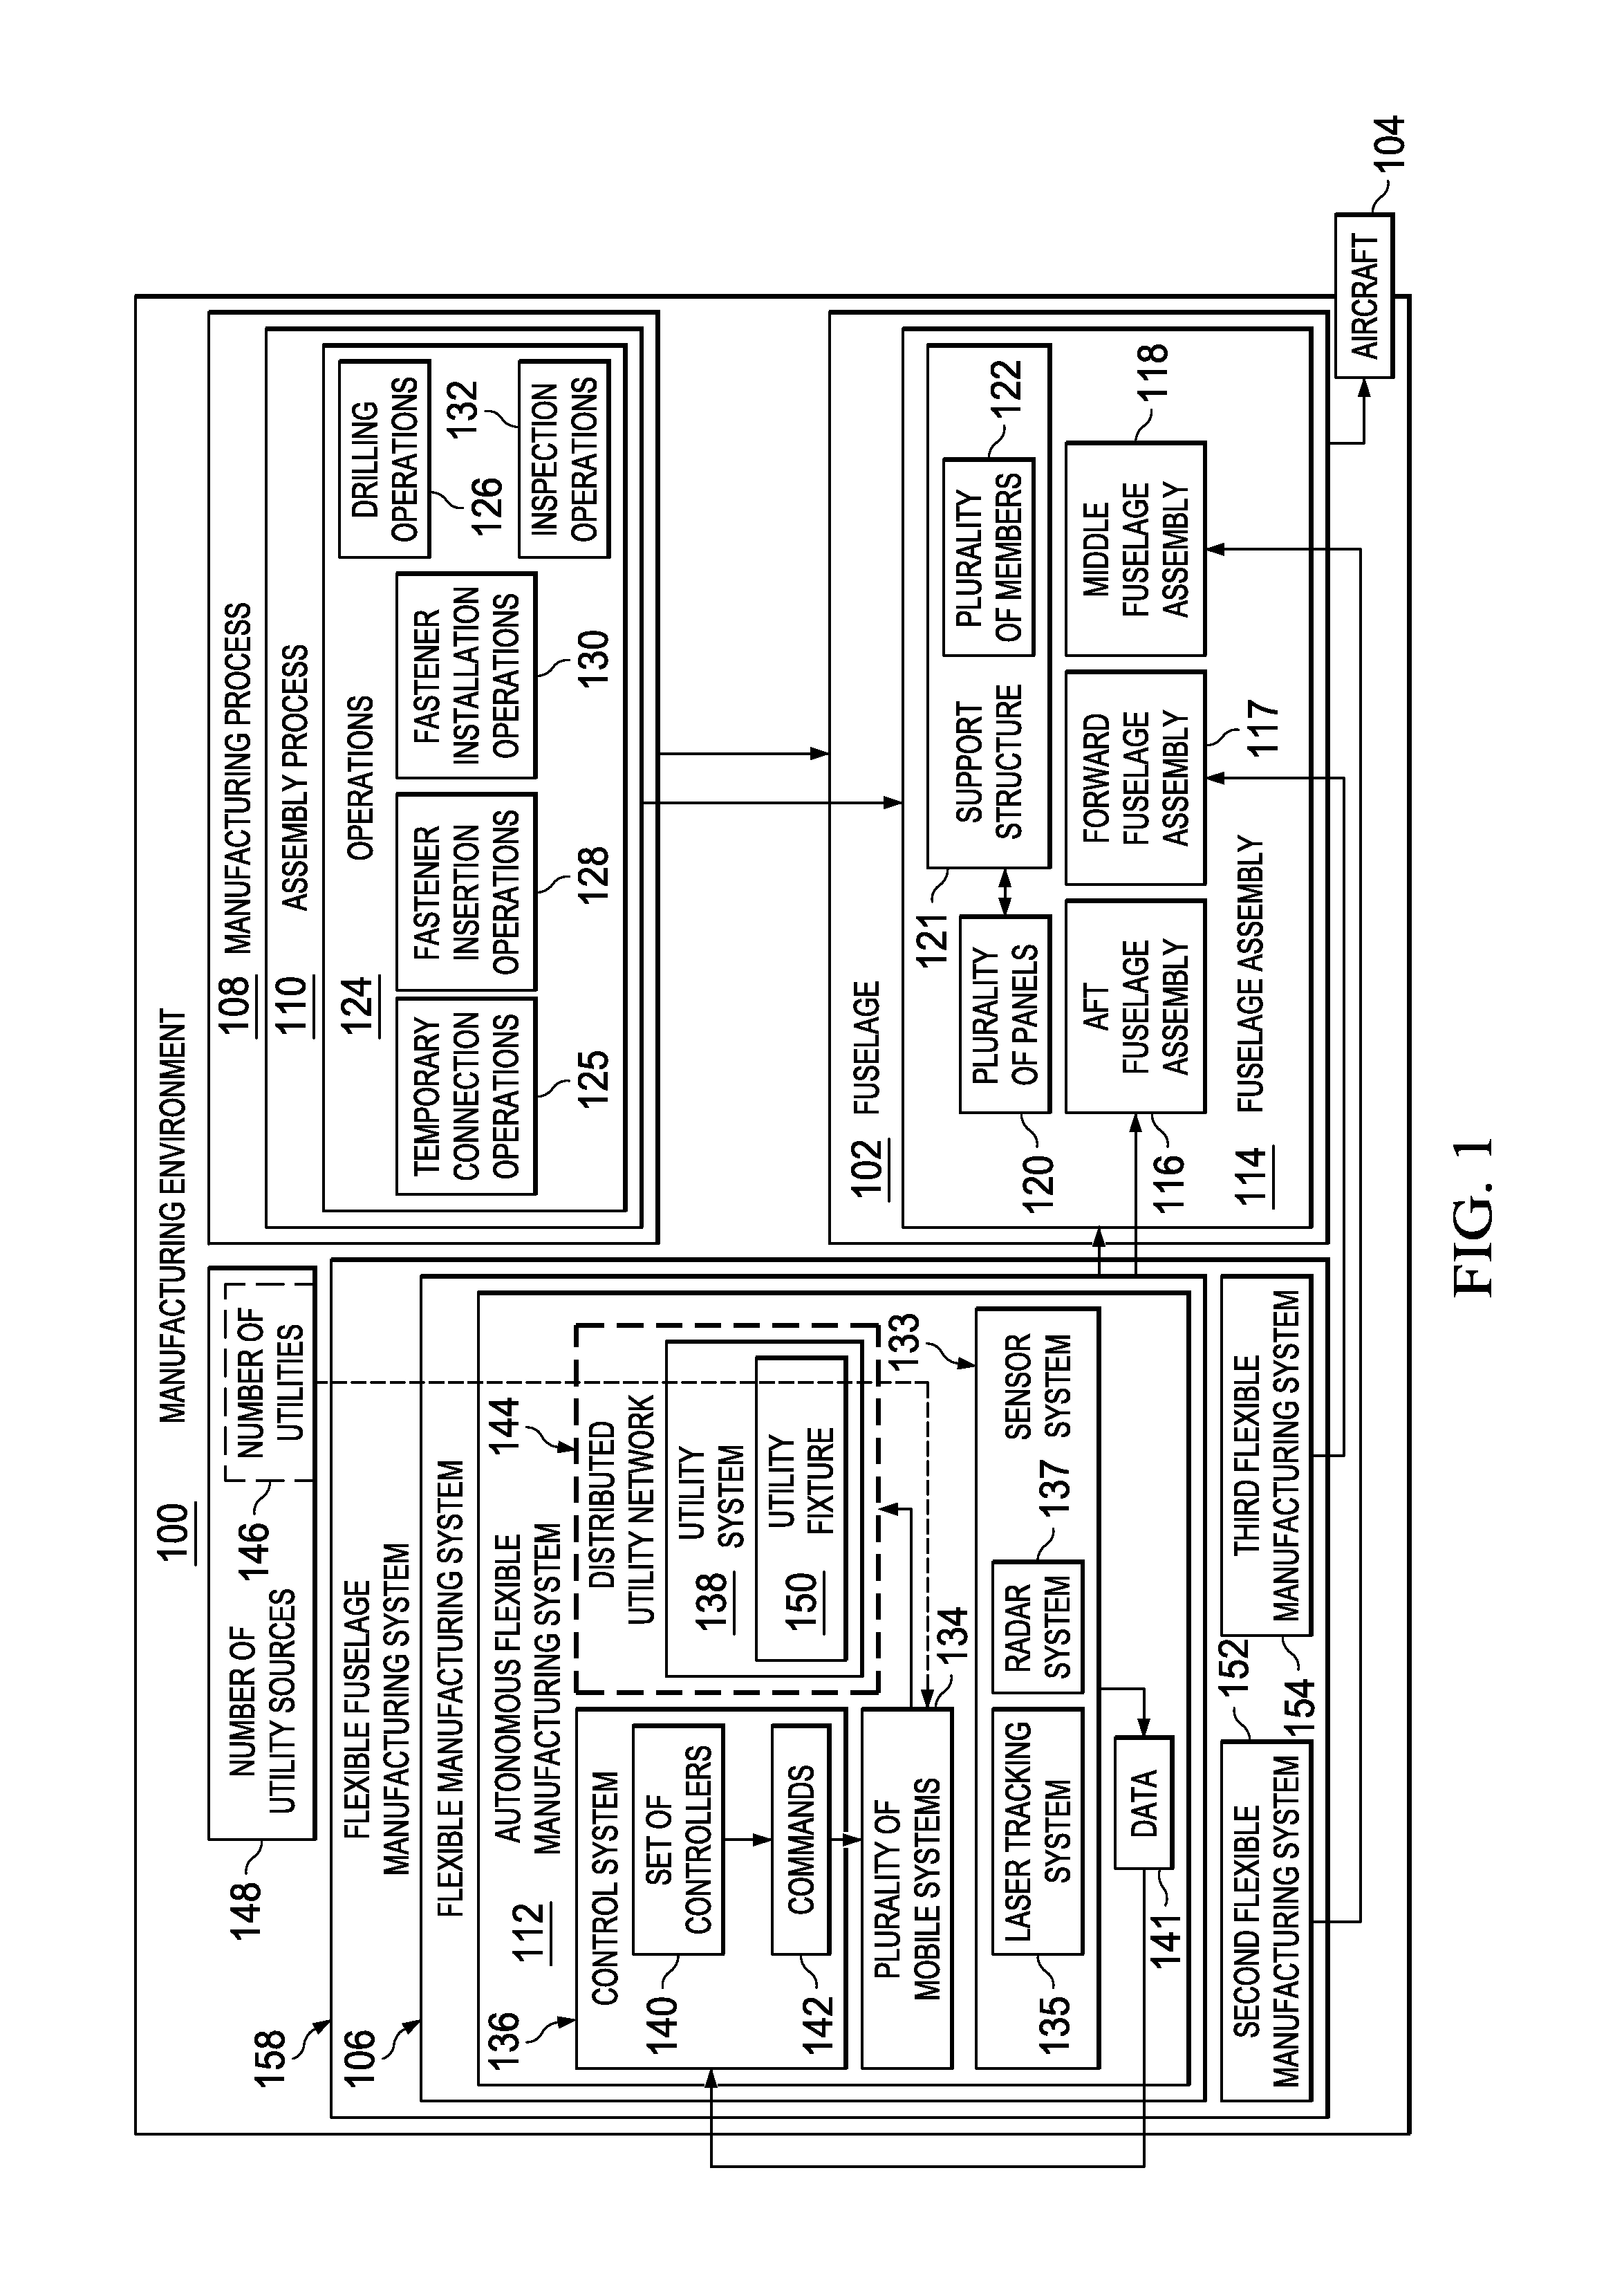 Mobile platforms for performing operations along an exterior of a fuselage assembly